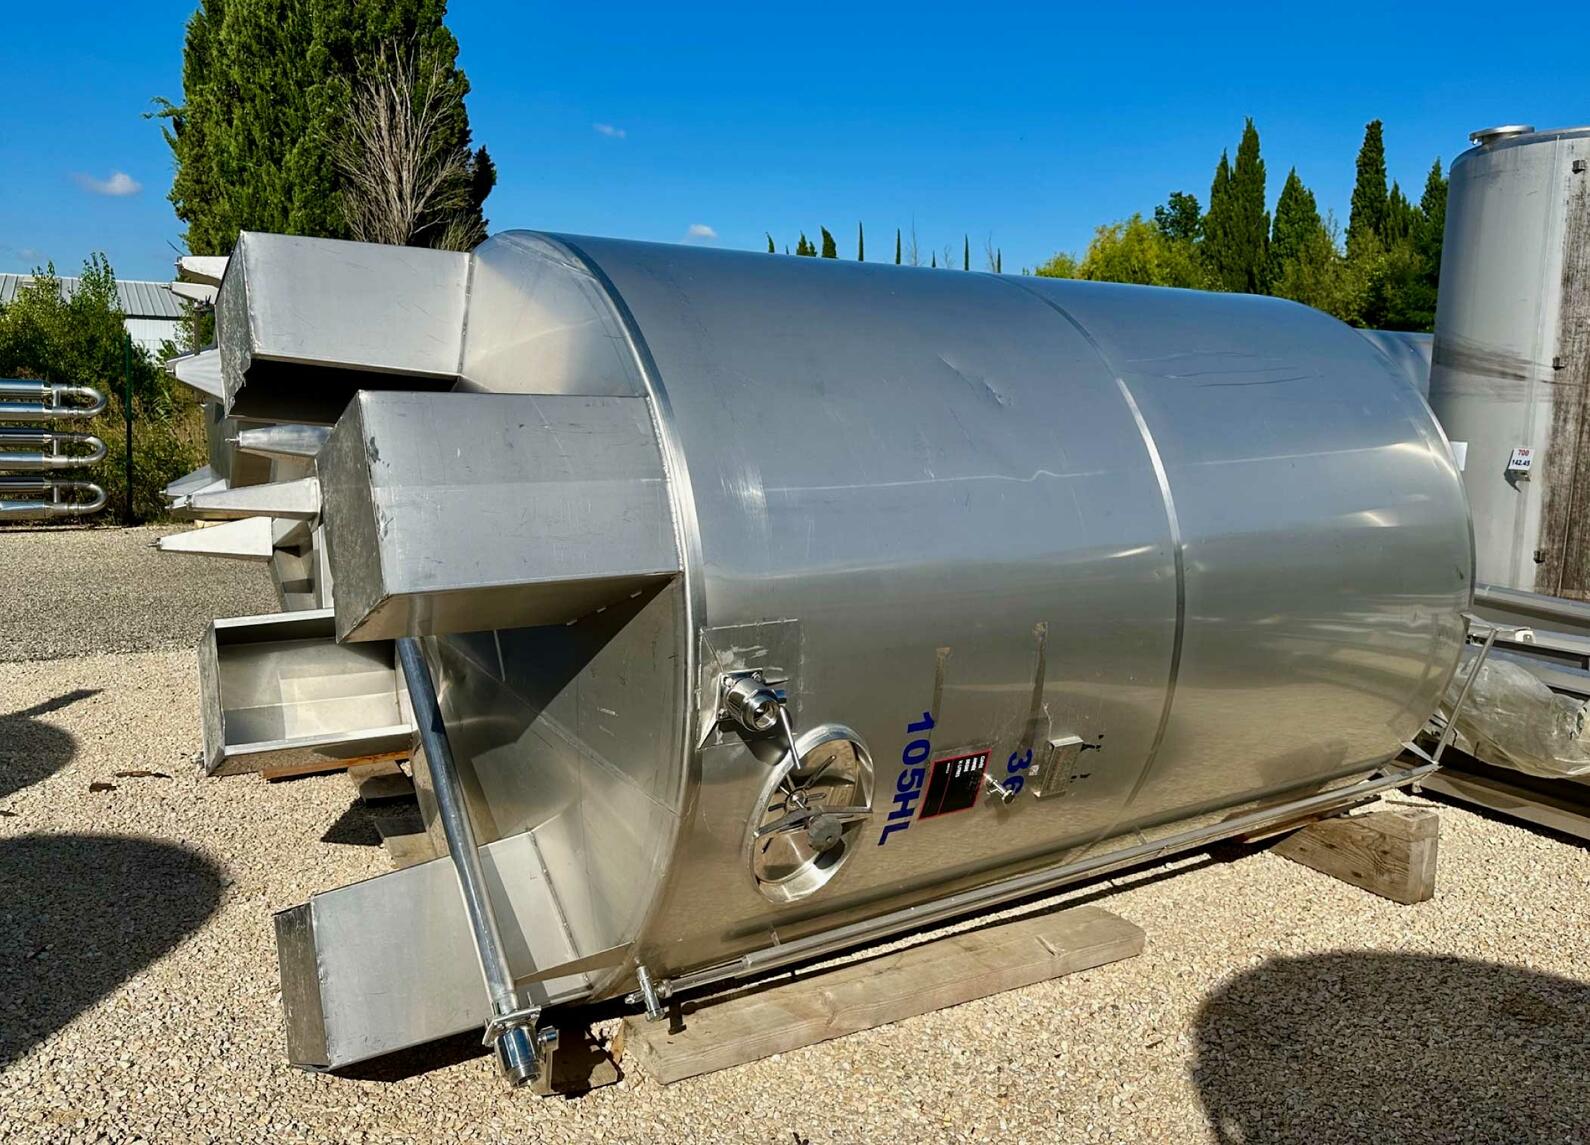 Stainless steel tank - Conical bottom - On feet